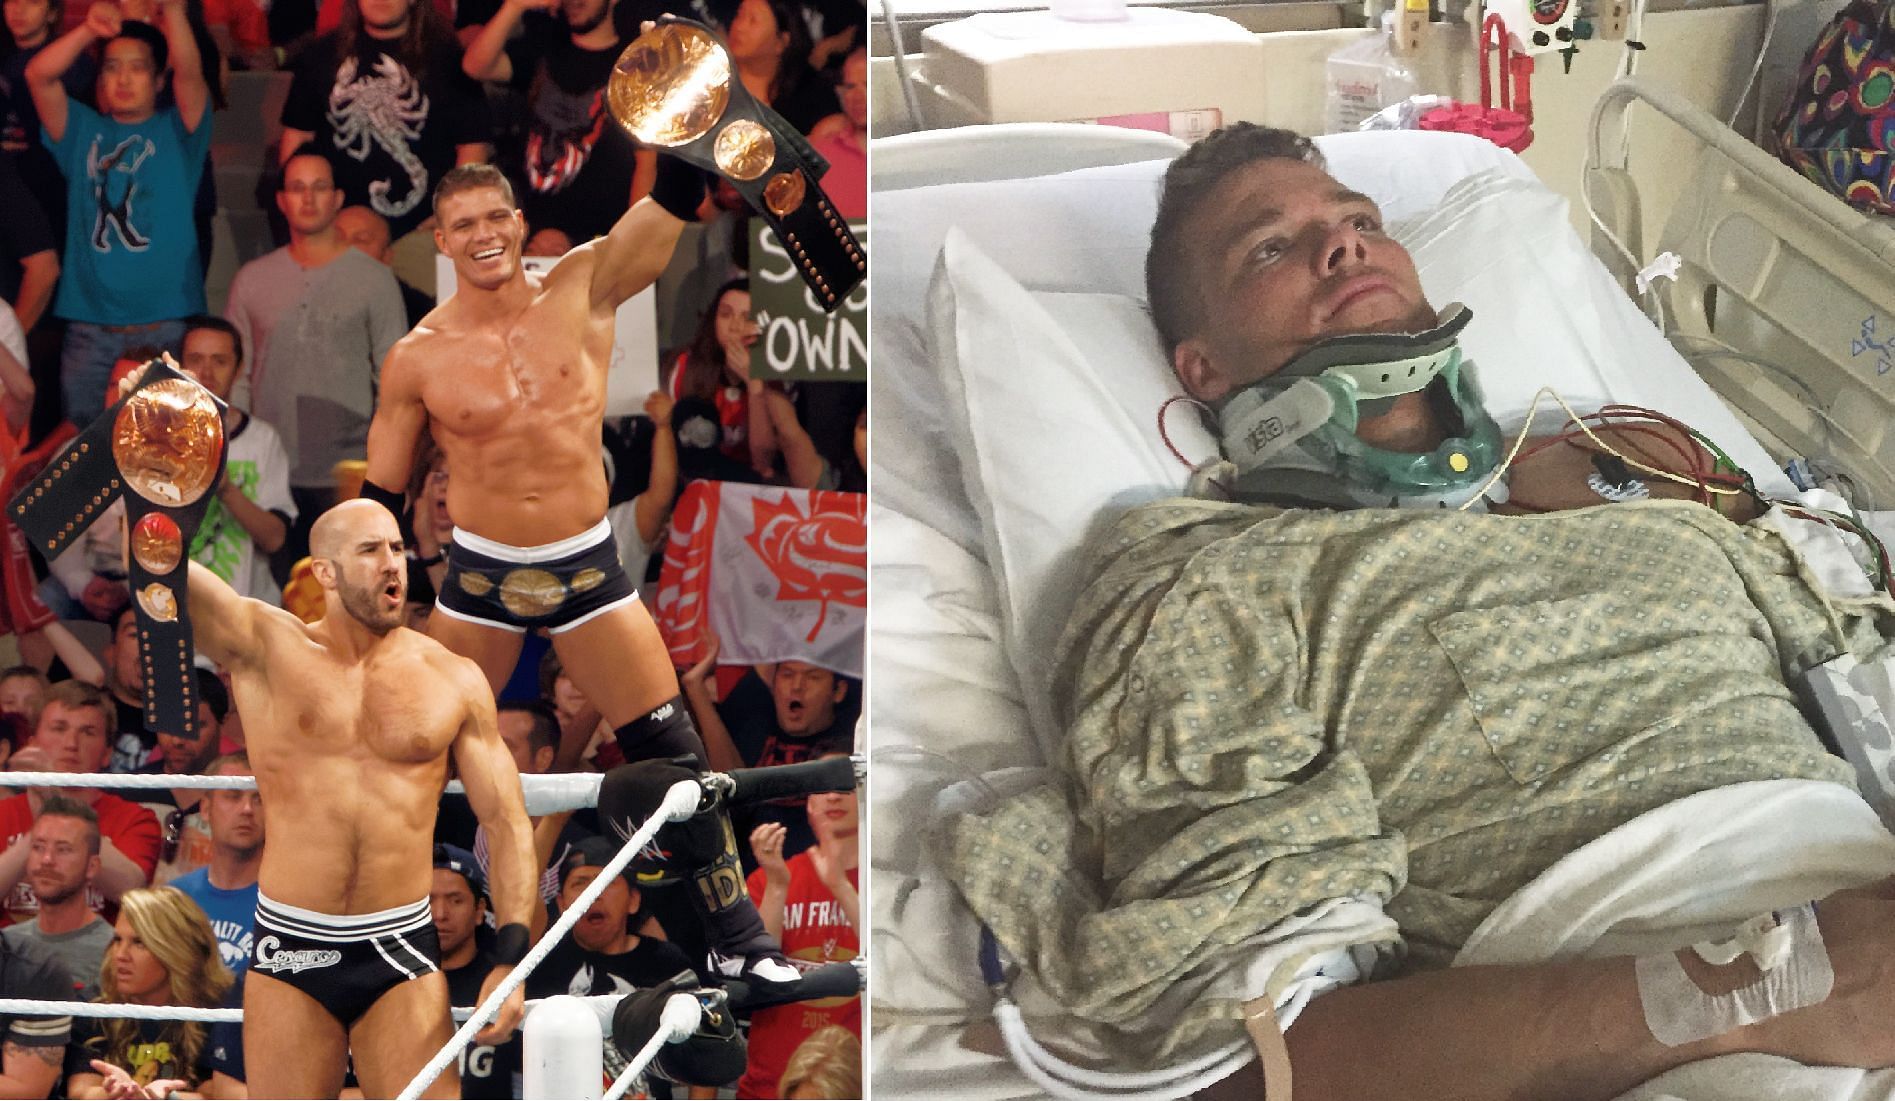 Tyson Kidd was forced to retire because of an injury